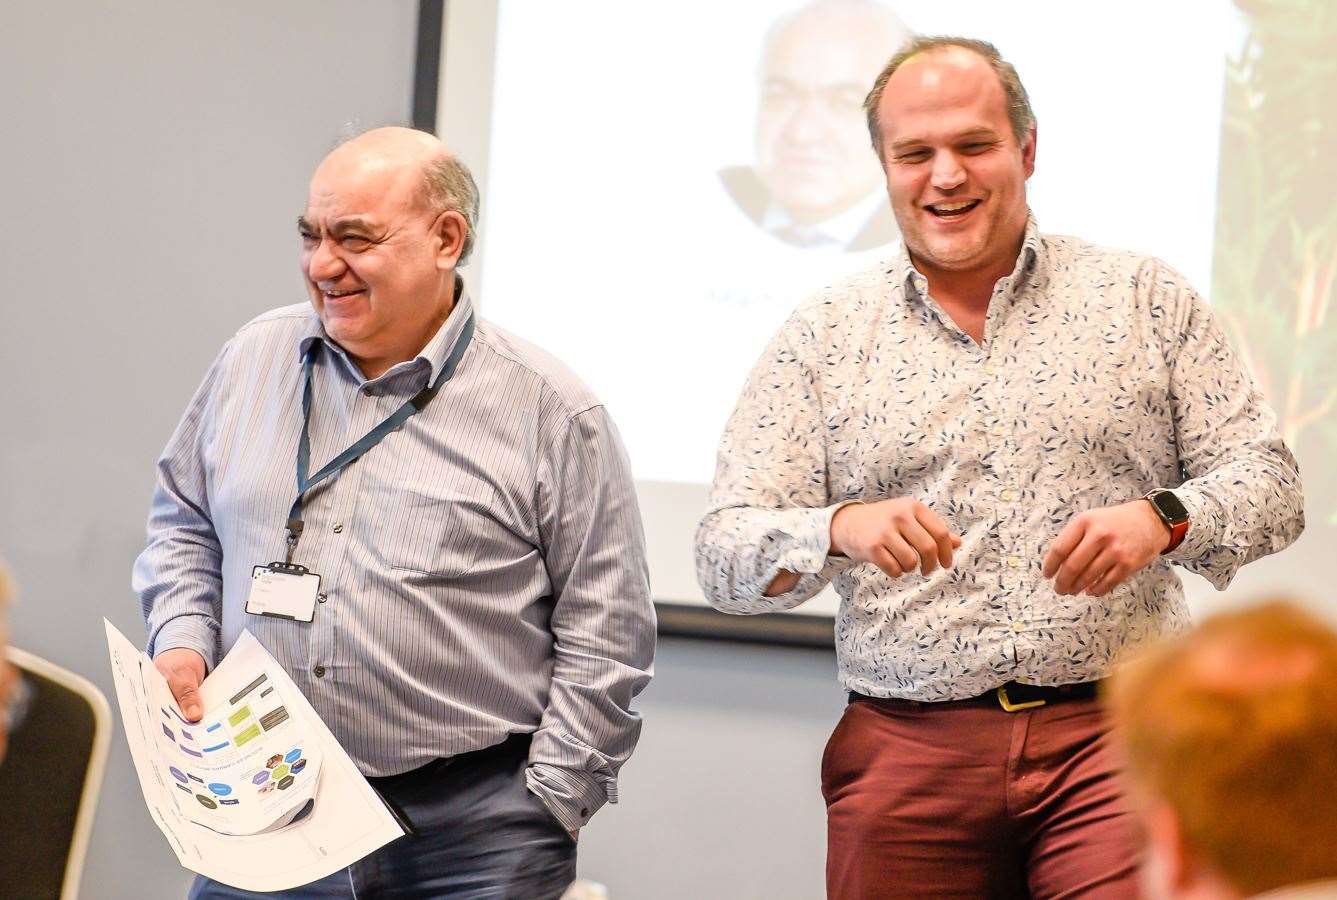 Dr Martino Picardo, chairman of Discovery Park and Dr Robert Barker of the University of Kent, presenting at the innovation boot camp